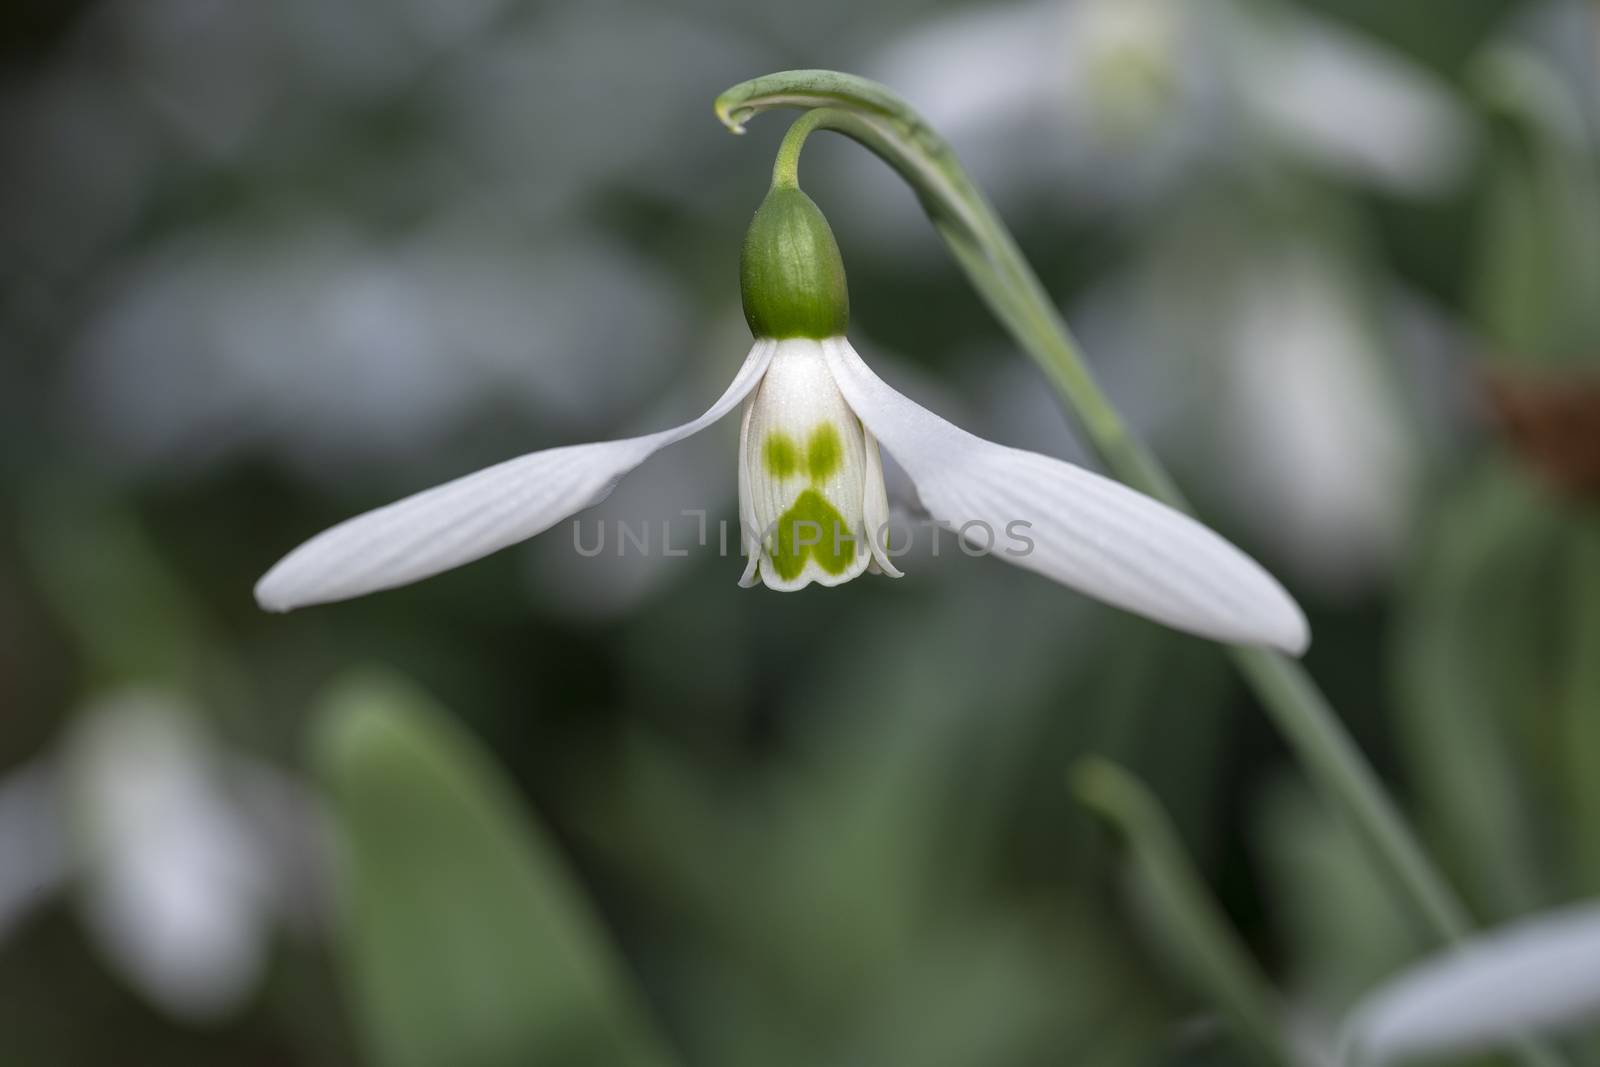 White snowdrop flower blooming in the edge and bright areas of the bushes